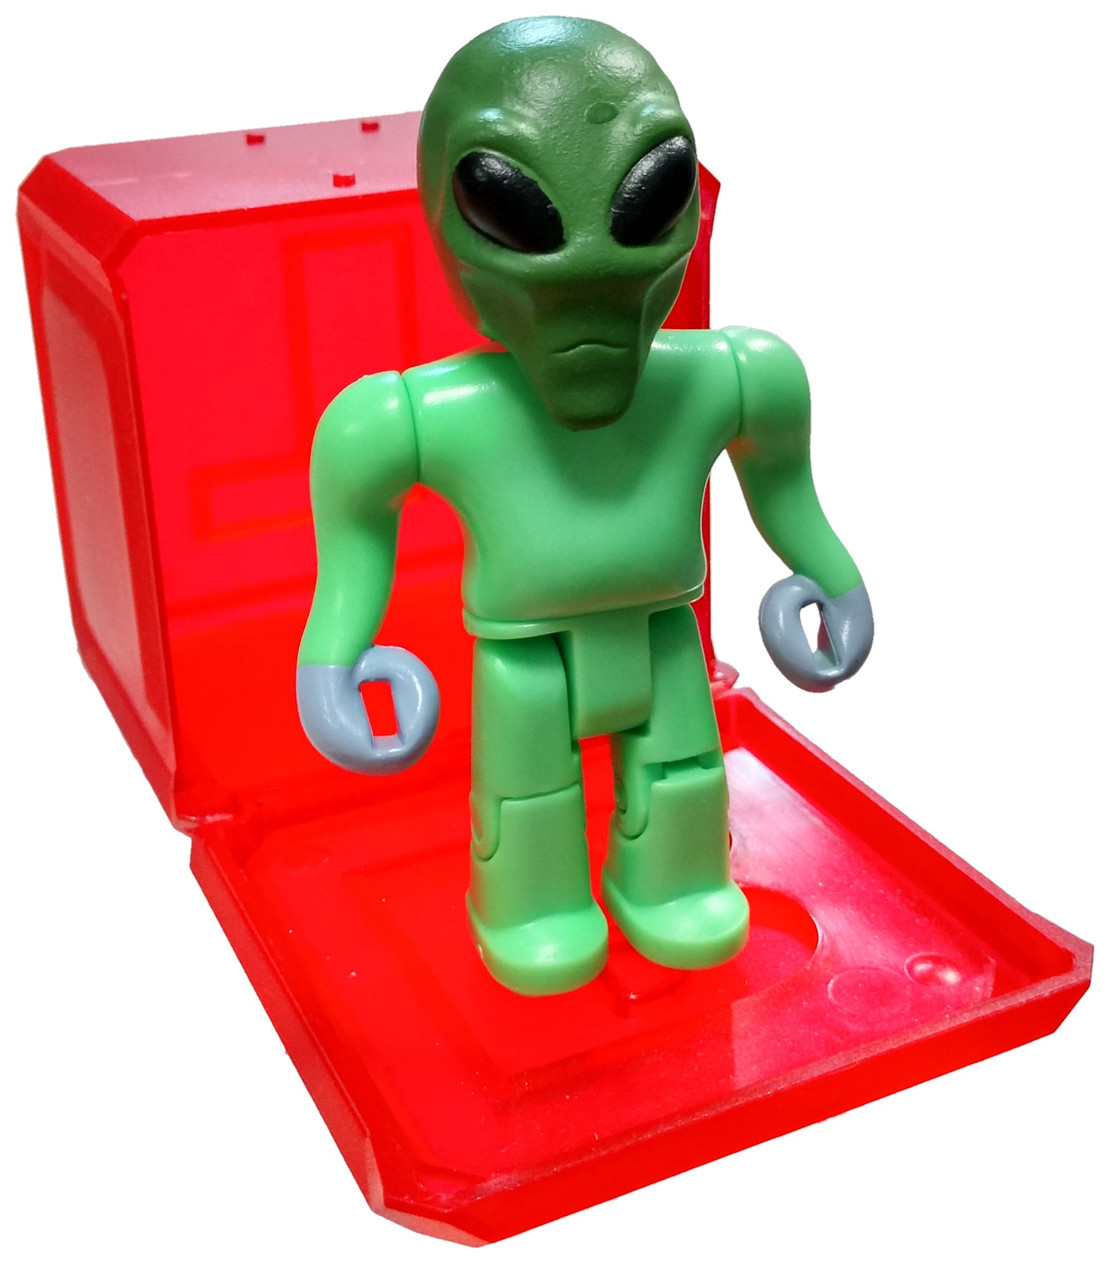 Roblox Celebrity Collection Series 5 Pinewood Alien 3 Mini Figure With Red Cube And Online Code Loose Jazwares Toywiz - roblox minifigures series 5